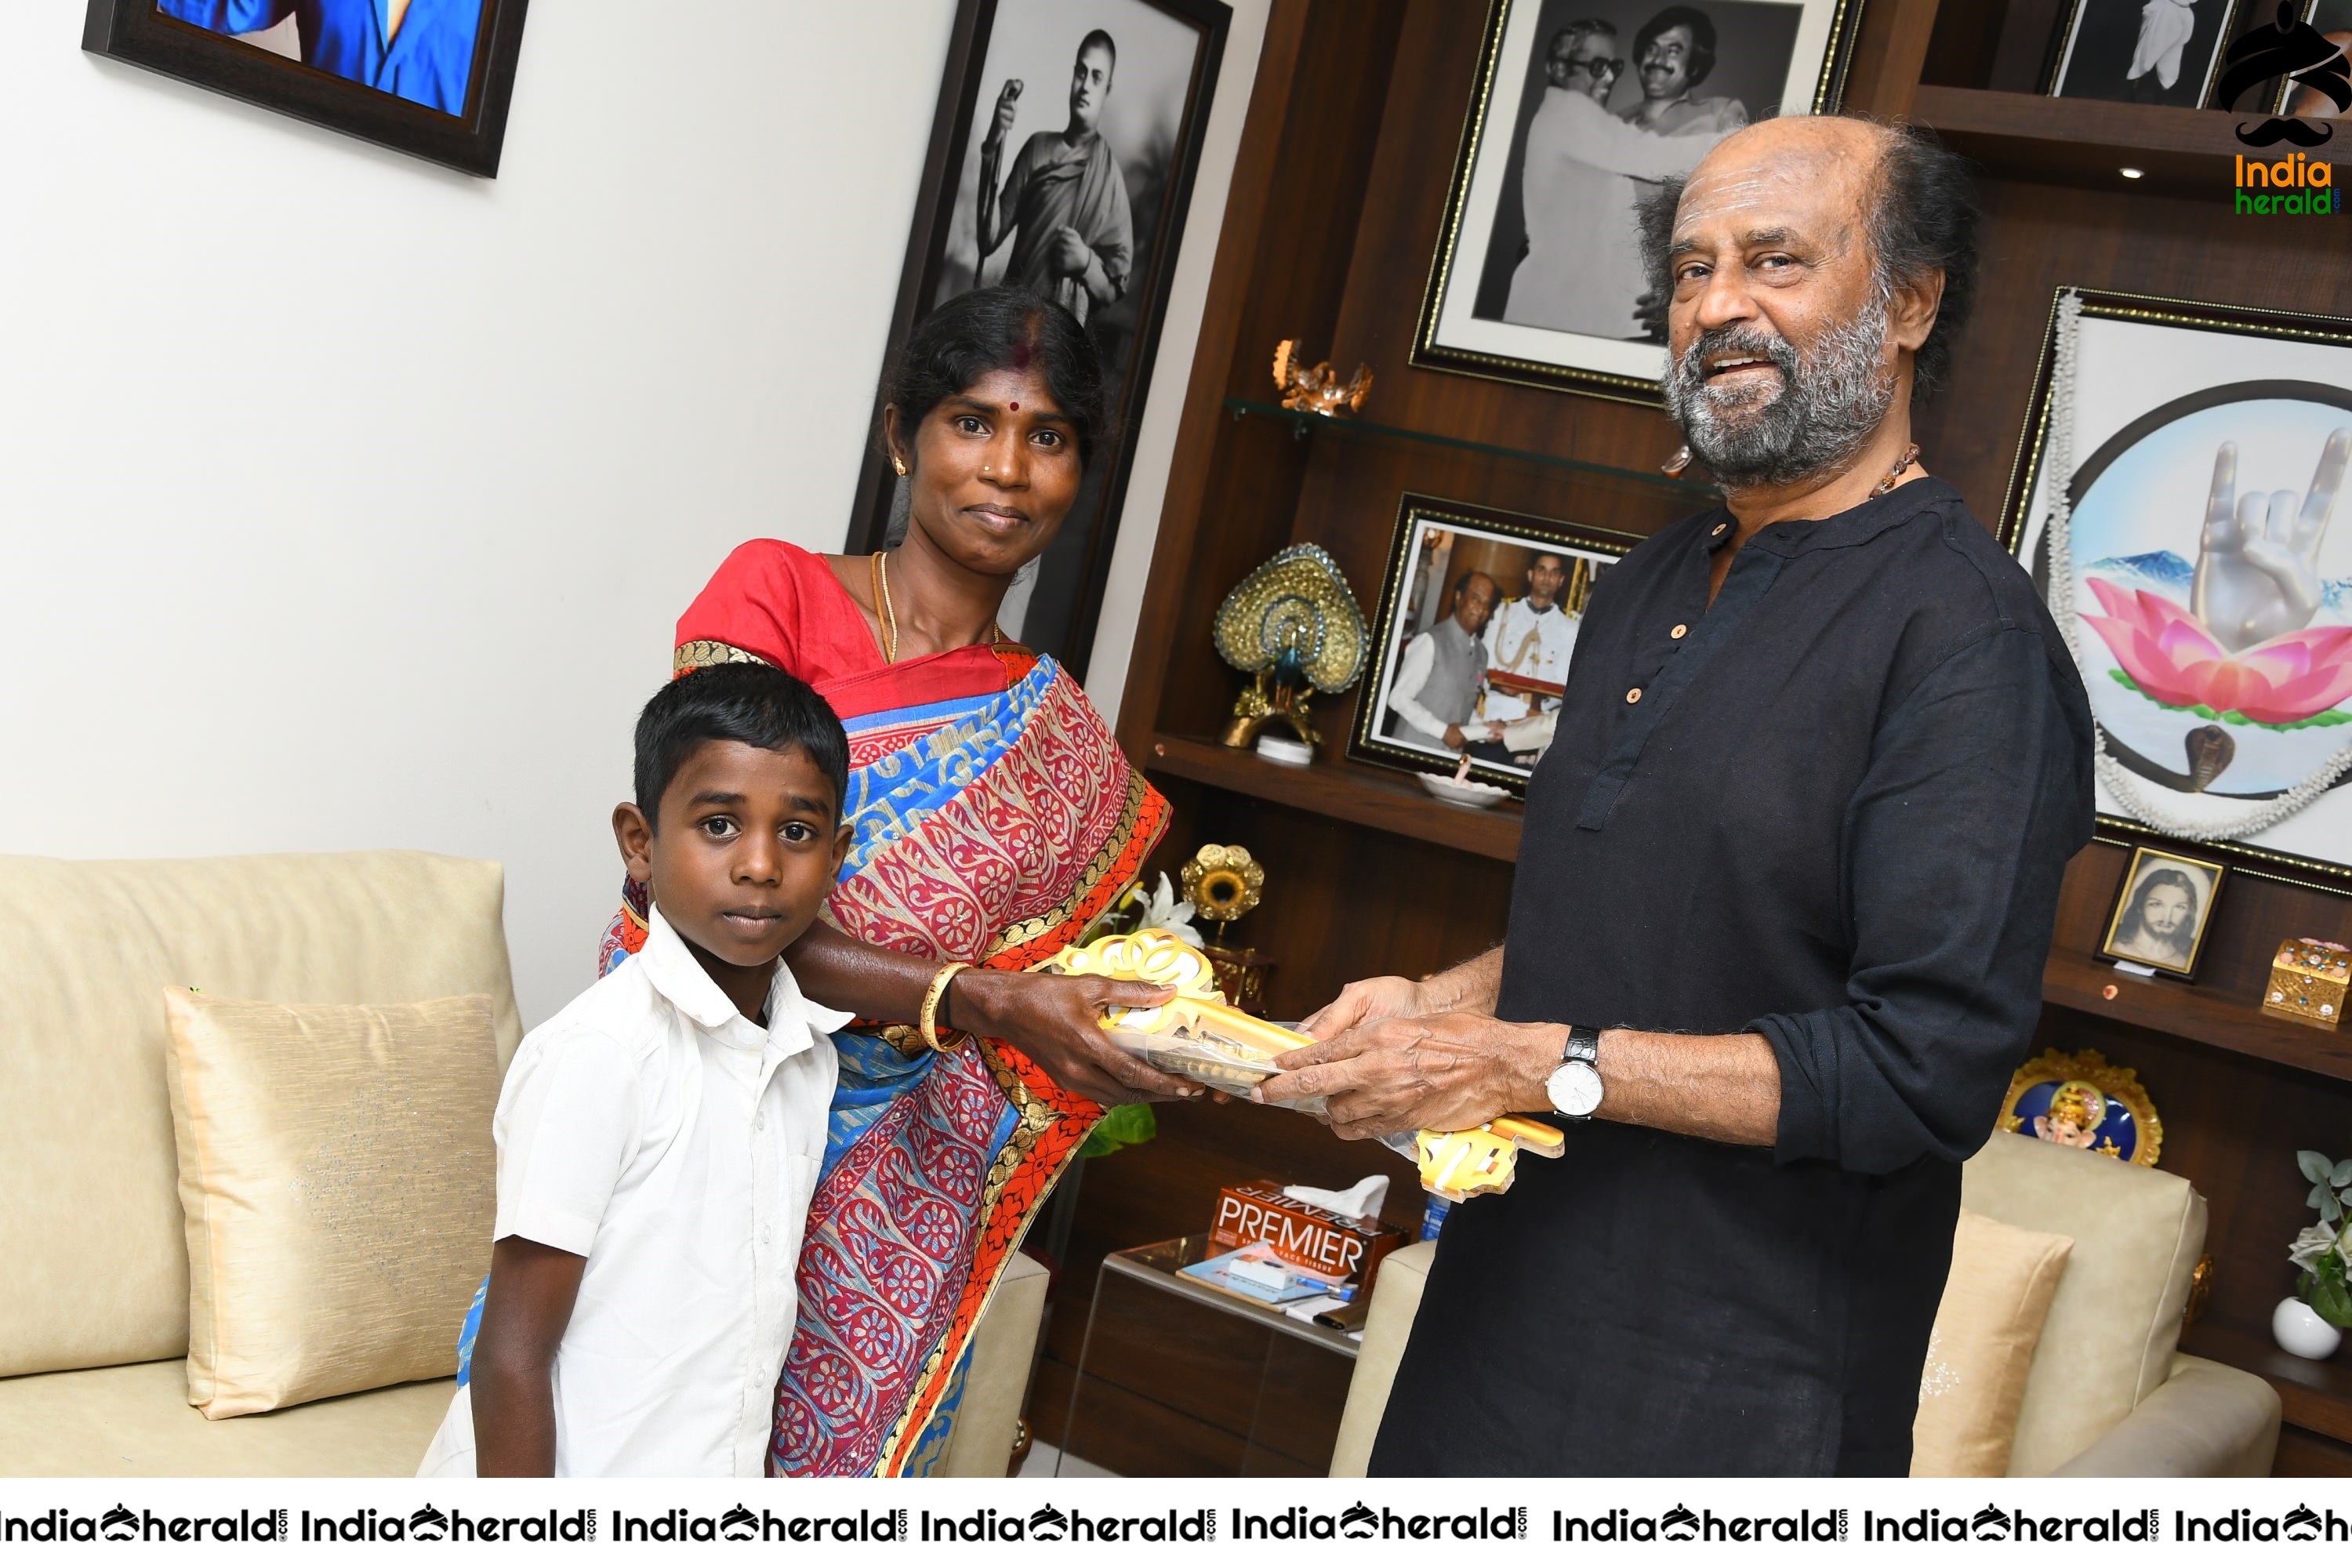 Super Star Rajini distribute Free Homes to the people who lost everything in Gaja Cyclone Set 1